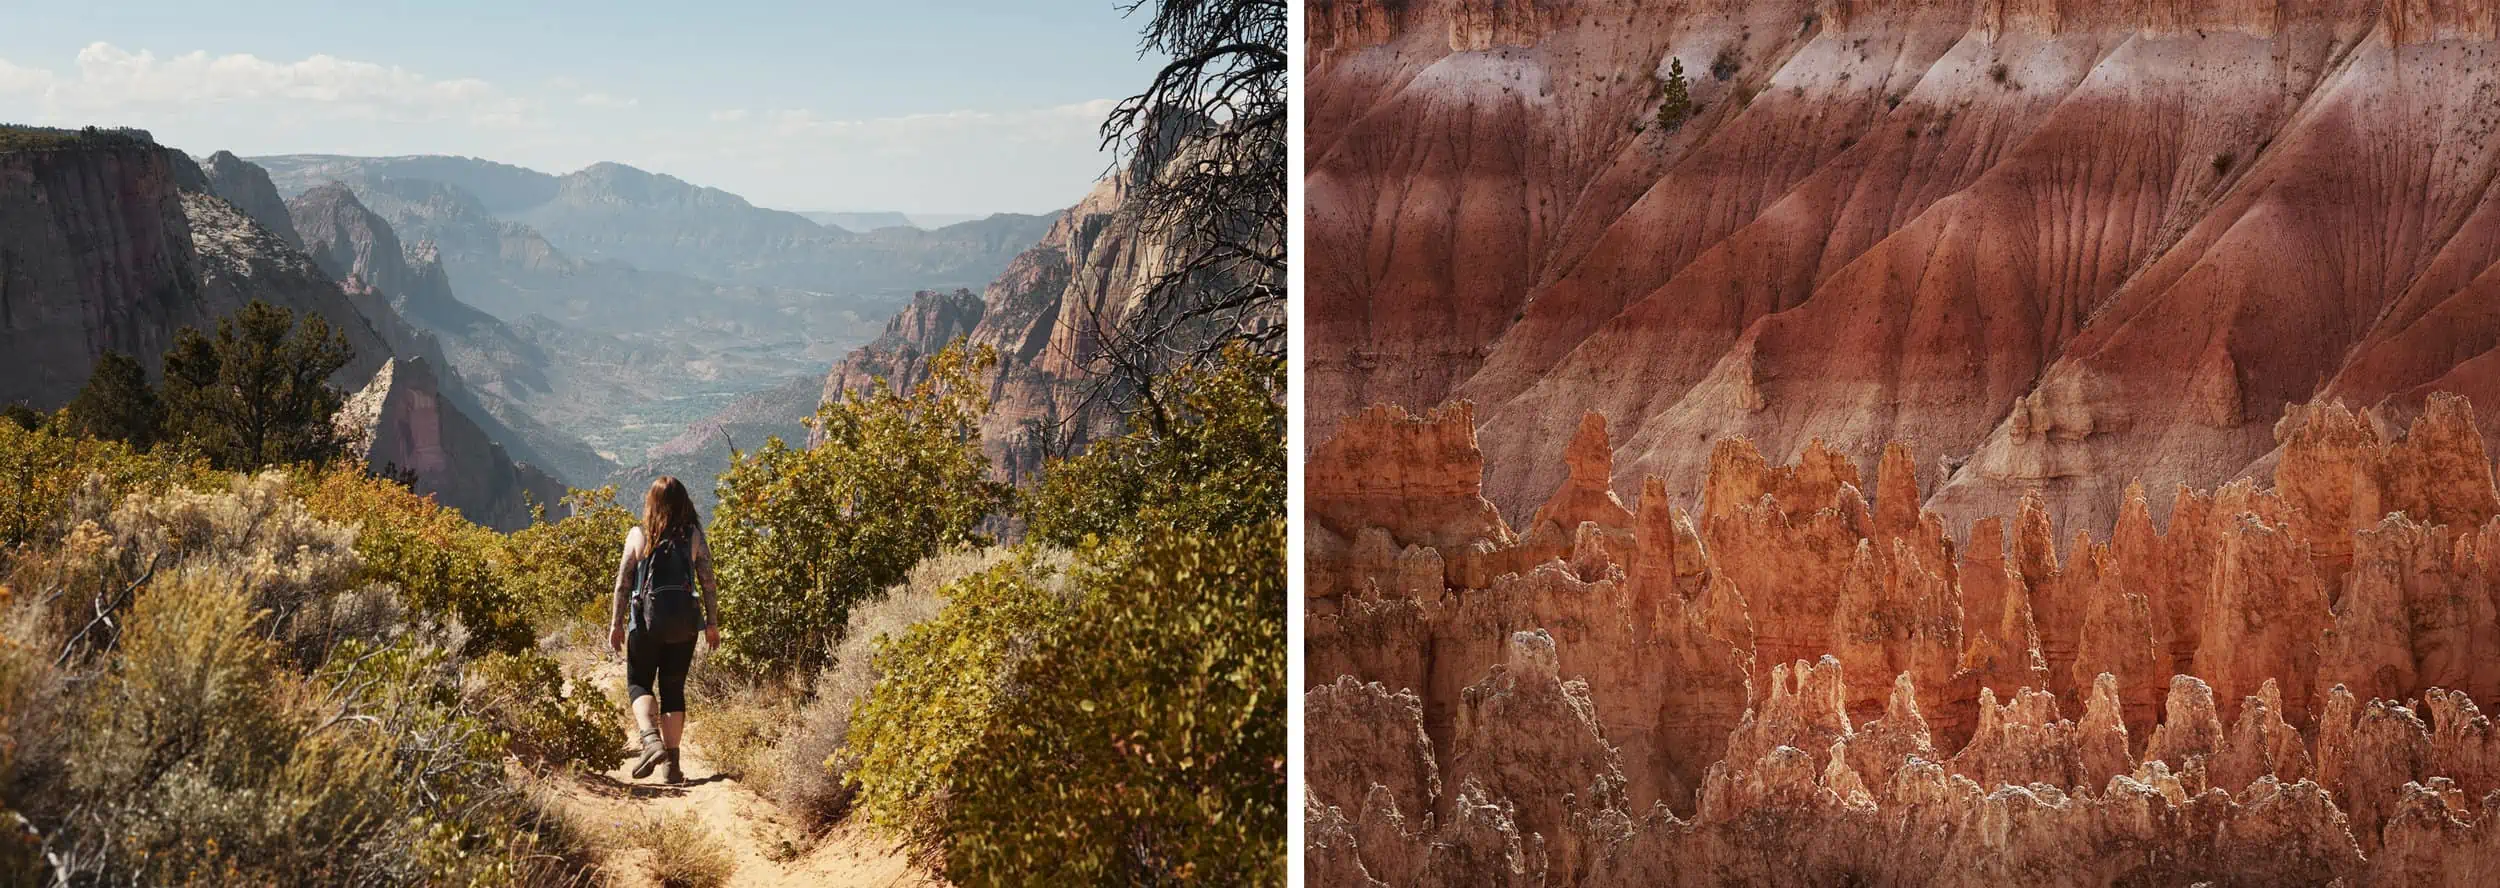 Left: Zion National Park, Right: Bryce Canyon National Park